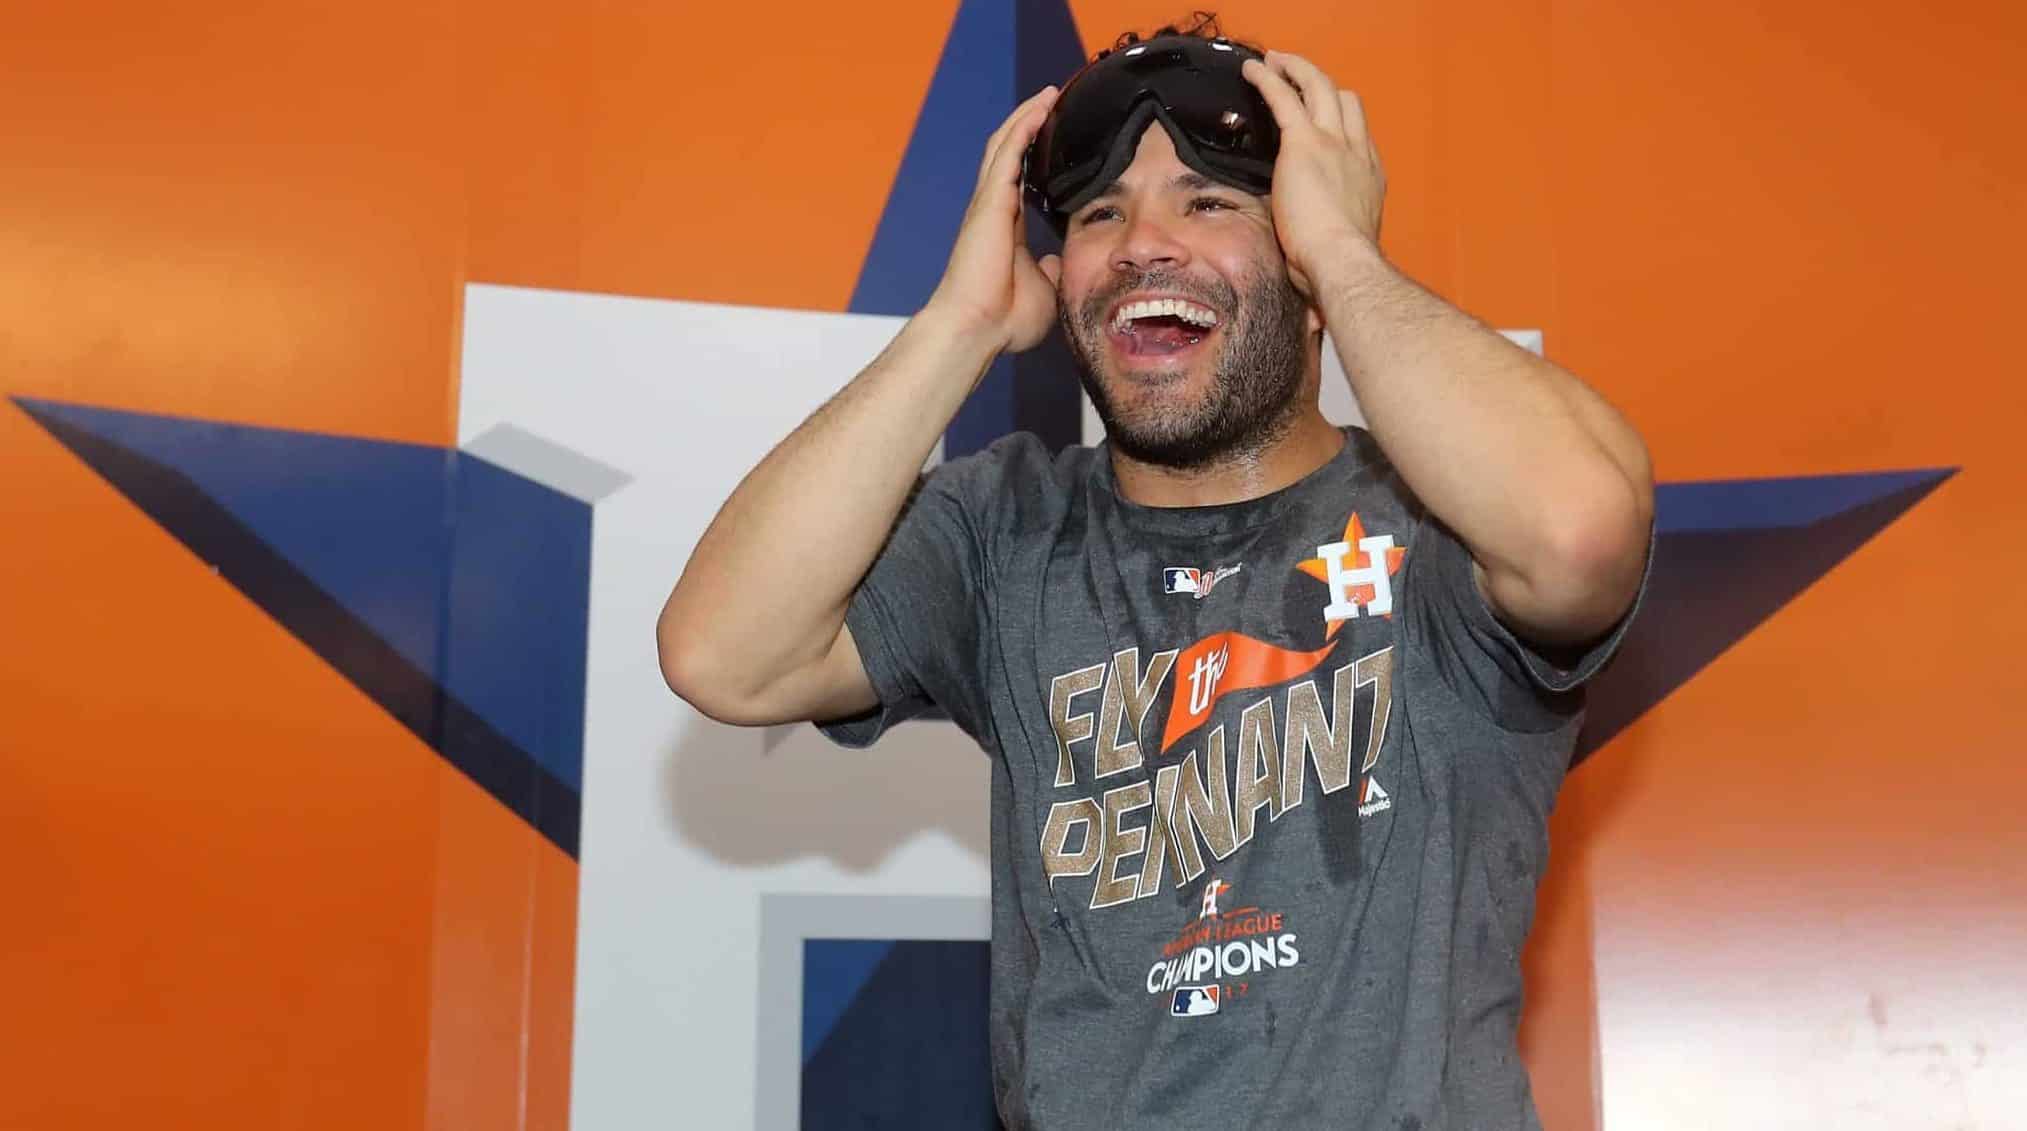 HOUSTON, TX - OCTOBER 21: Jose Altuve #27 of the Houston Astros celebrates in the locker room after defeating the New York Yankees by a score of 4-0 to win Game Seven of the American League Championship Series at Minute Maid Park on October 21, 2017 in Houston, Texas. The Houston Astros advance to face the Los Angeles Dodgers in the World Series.